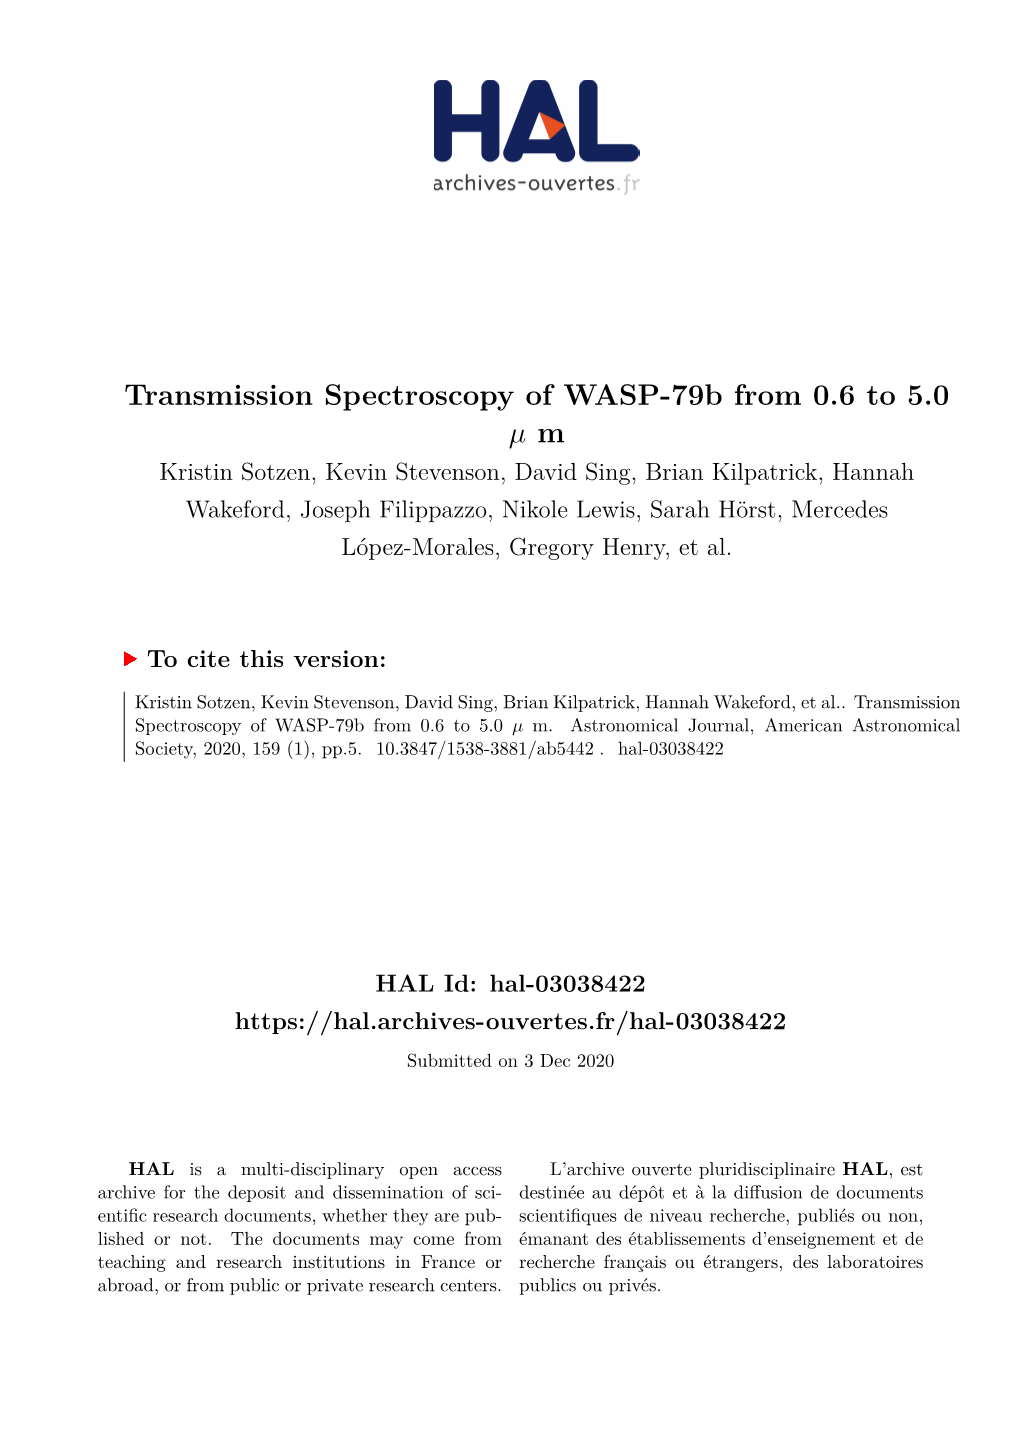 Transmission Spectroscopy of WASP-79B from 0.6 to 5.0 M